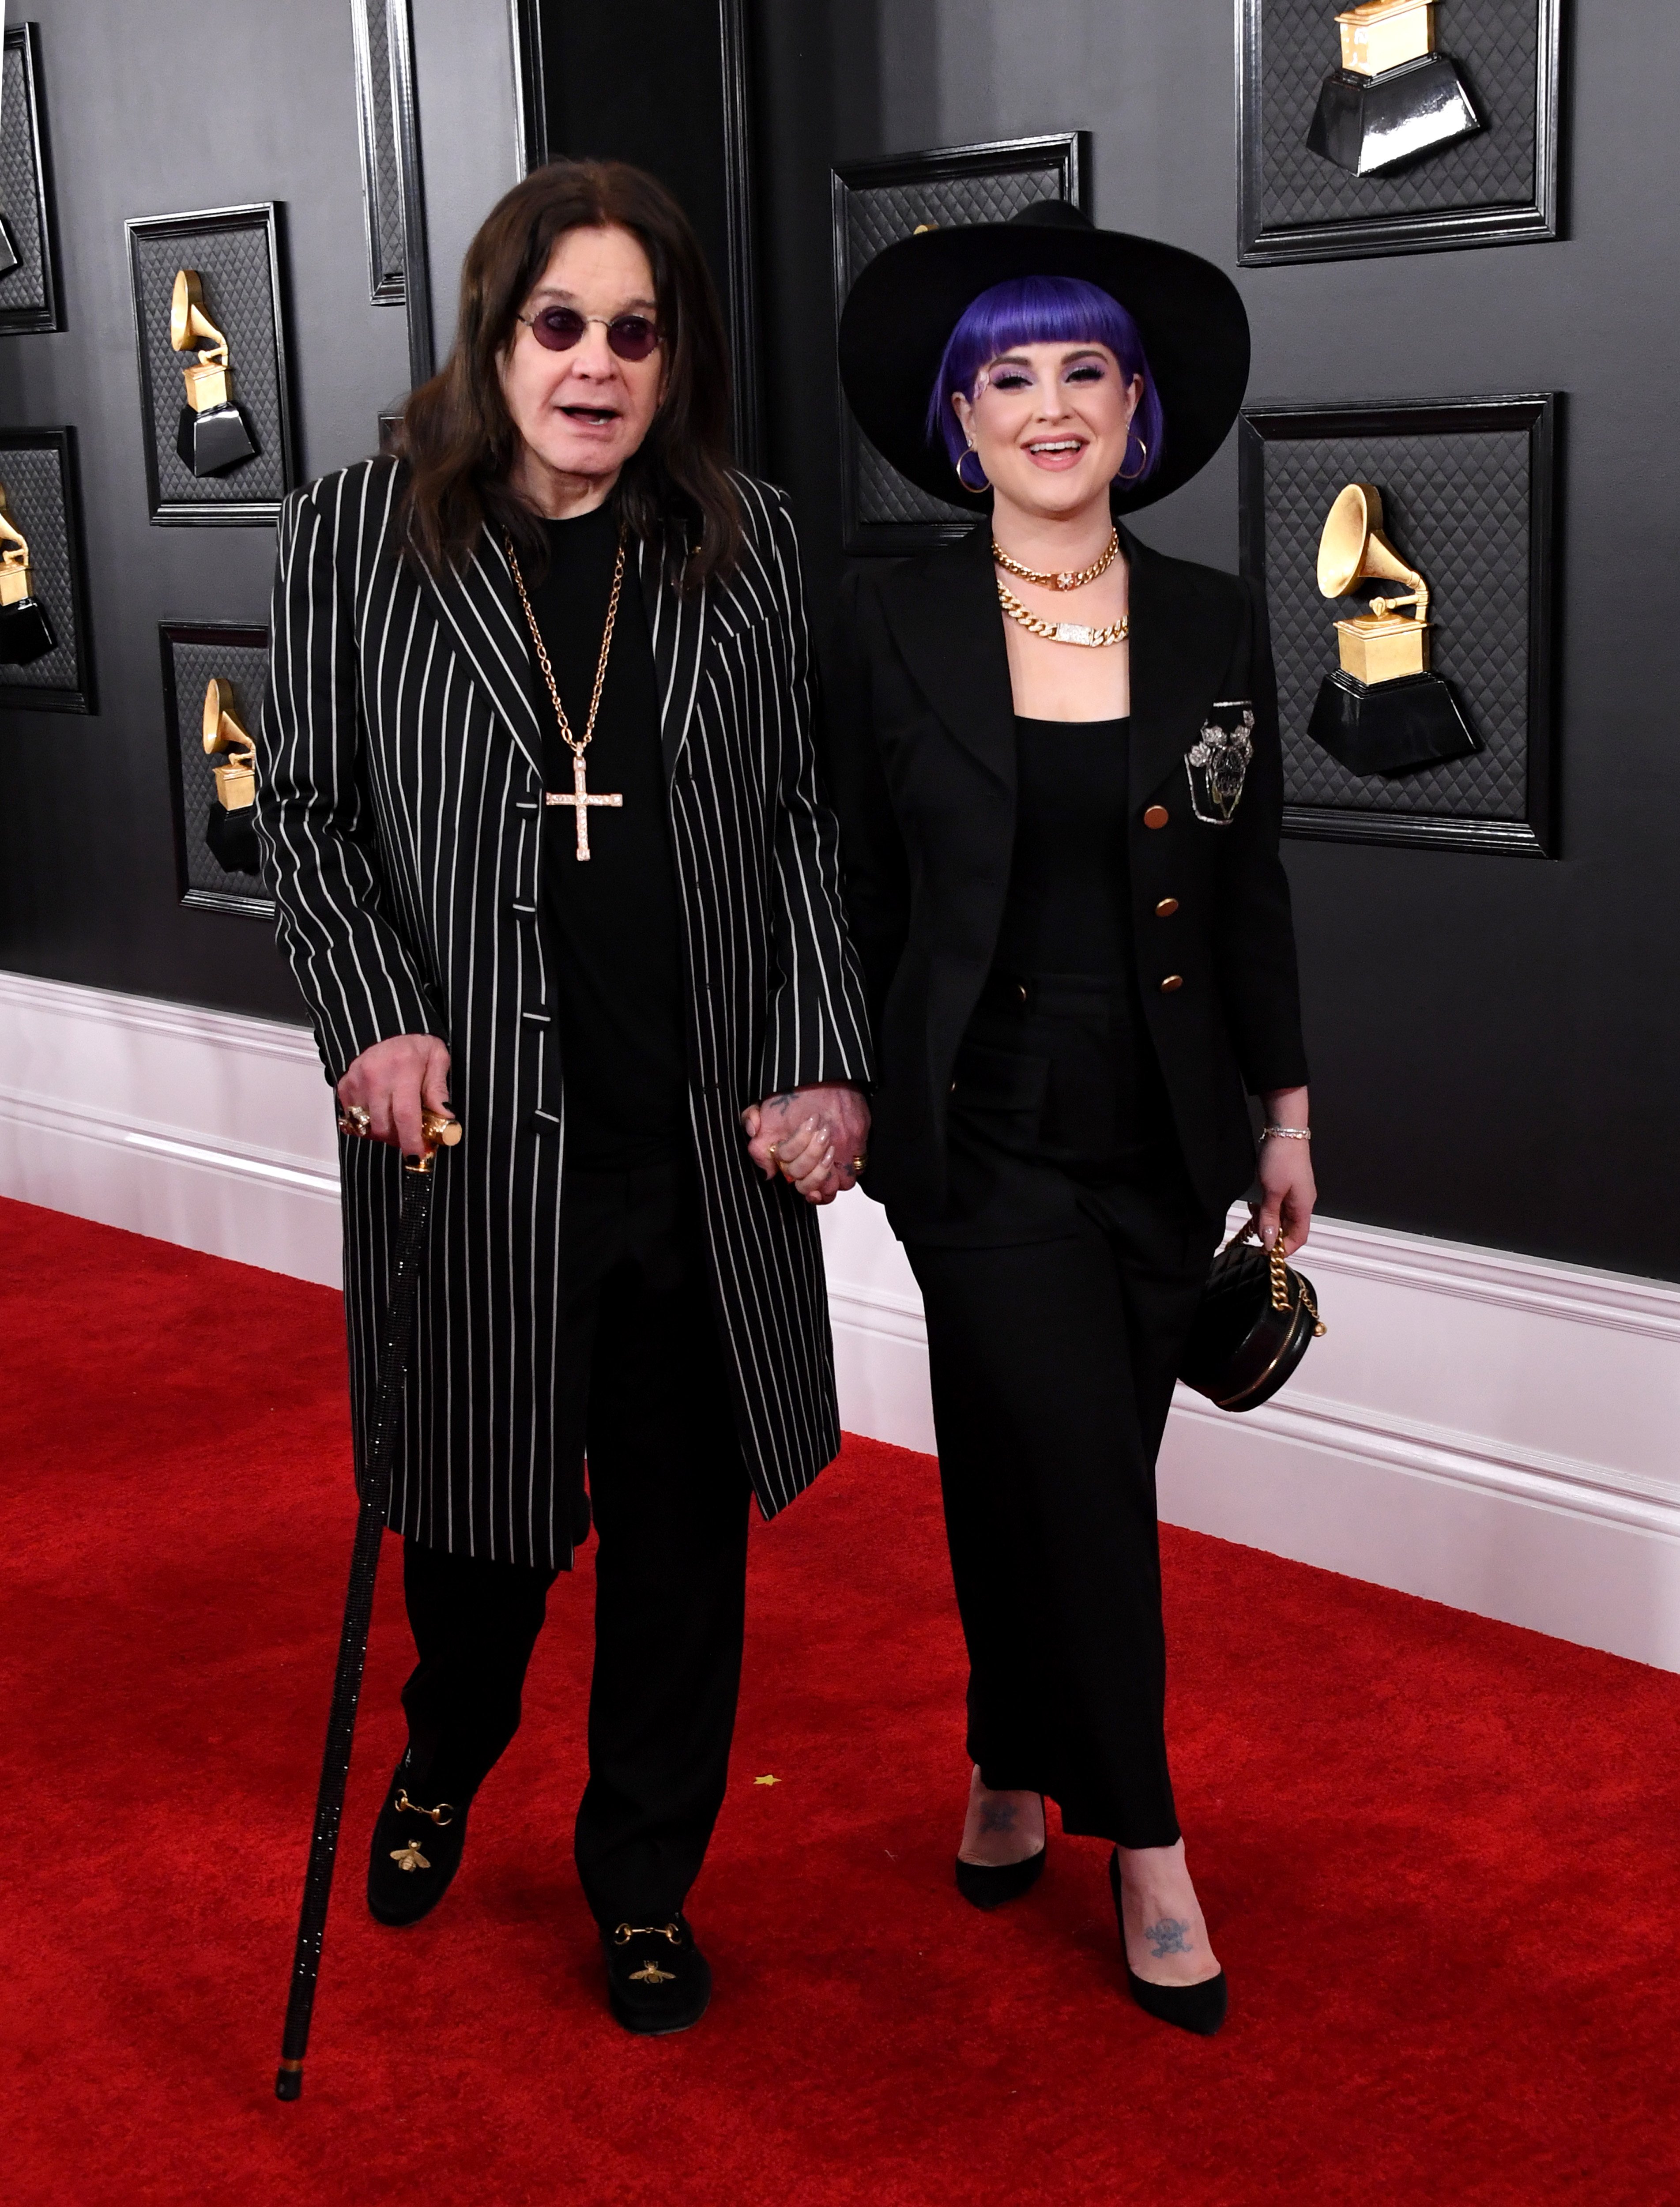 Ozzy Osbourne and Kelly Osbourne attend the 62nd Annual GRAMMY Awards at Staples Center on January 26, 2020 in Los Angeles, California | Source: Getty Images 